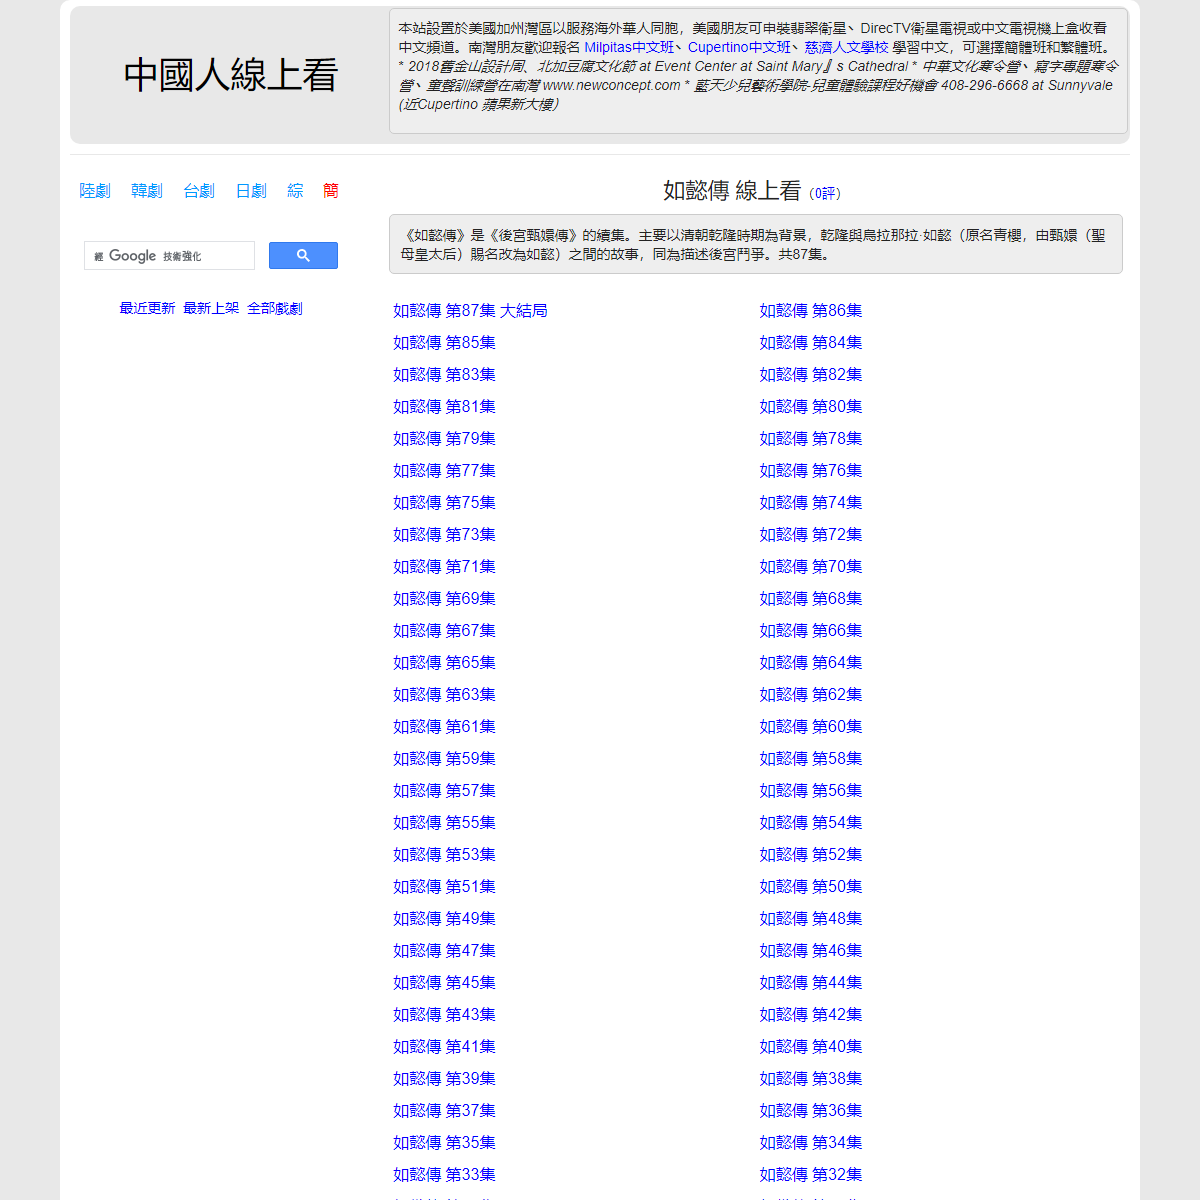 A complete backup of https://chinaq.tv/cn180820/